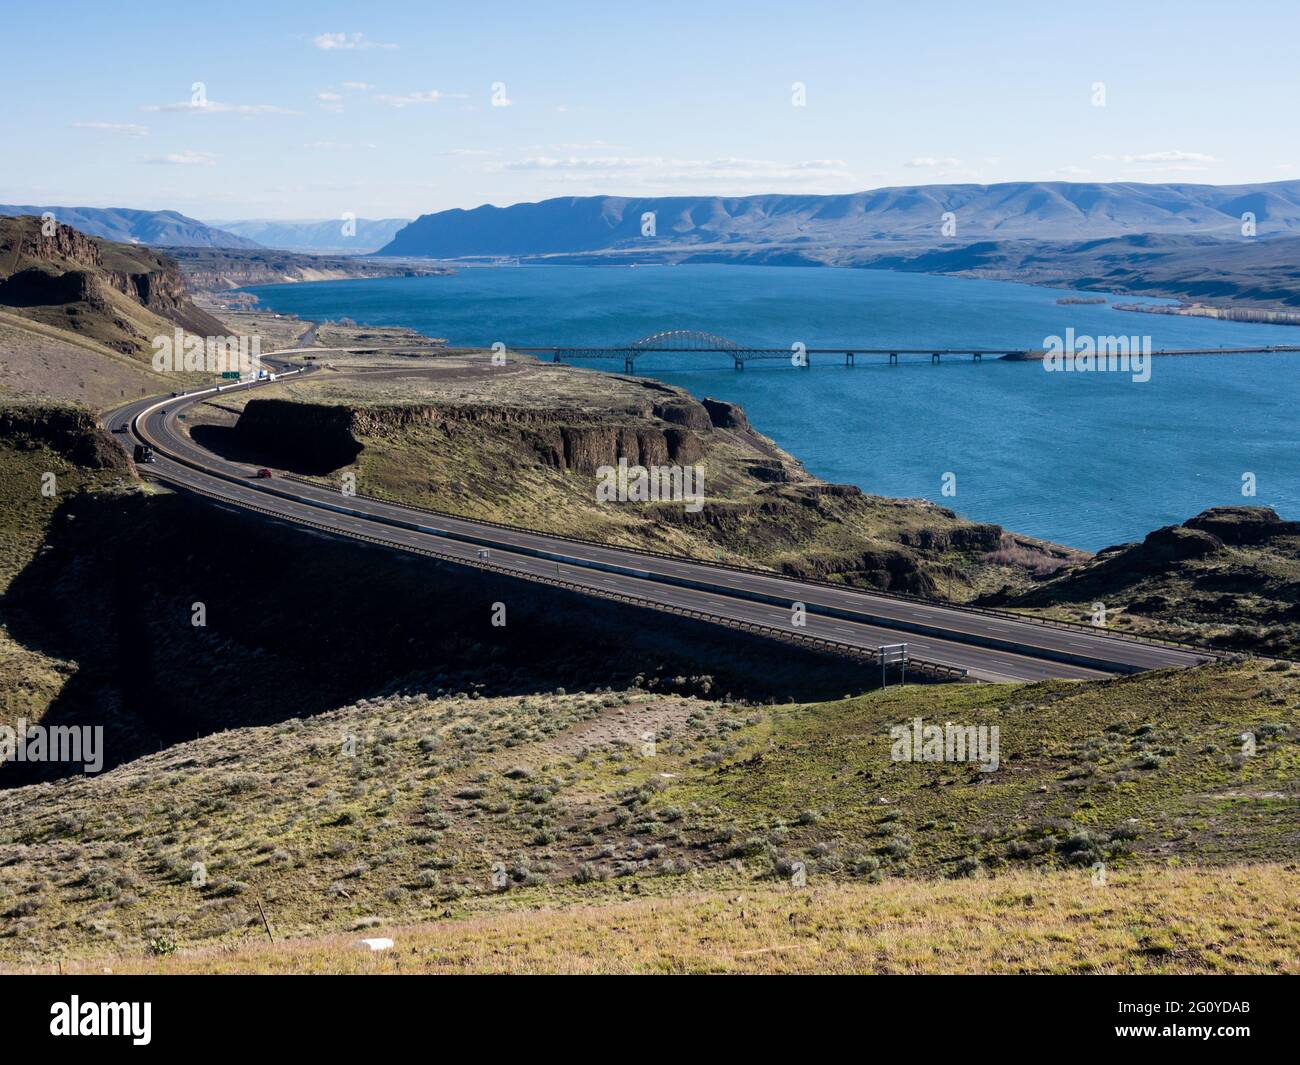 VIew of Columbia river and I-90 Vantage bridge in Washintong state from Wild Horse viewpoint Stock Photo